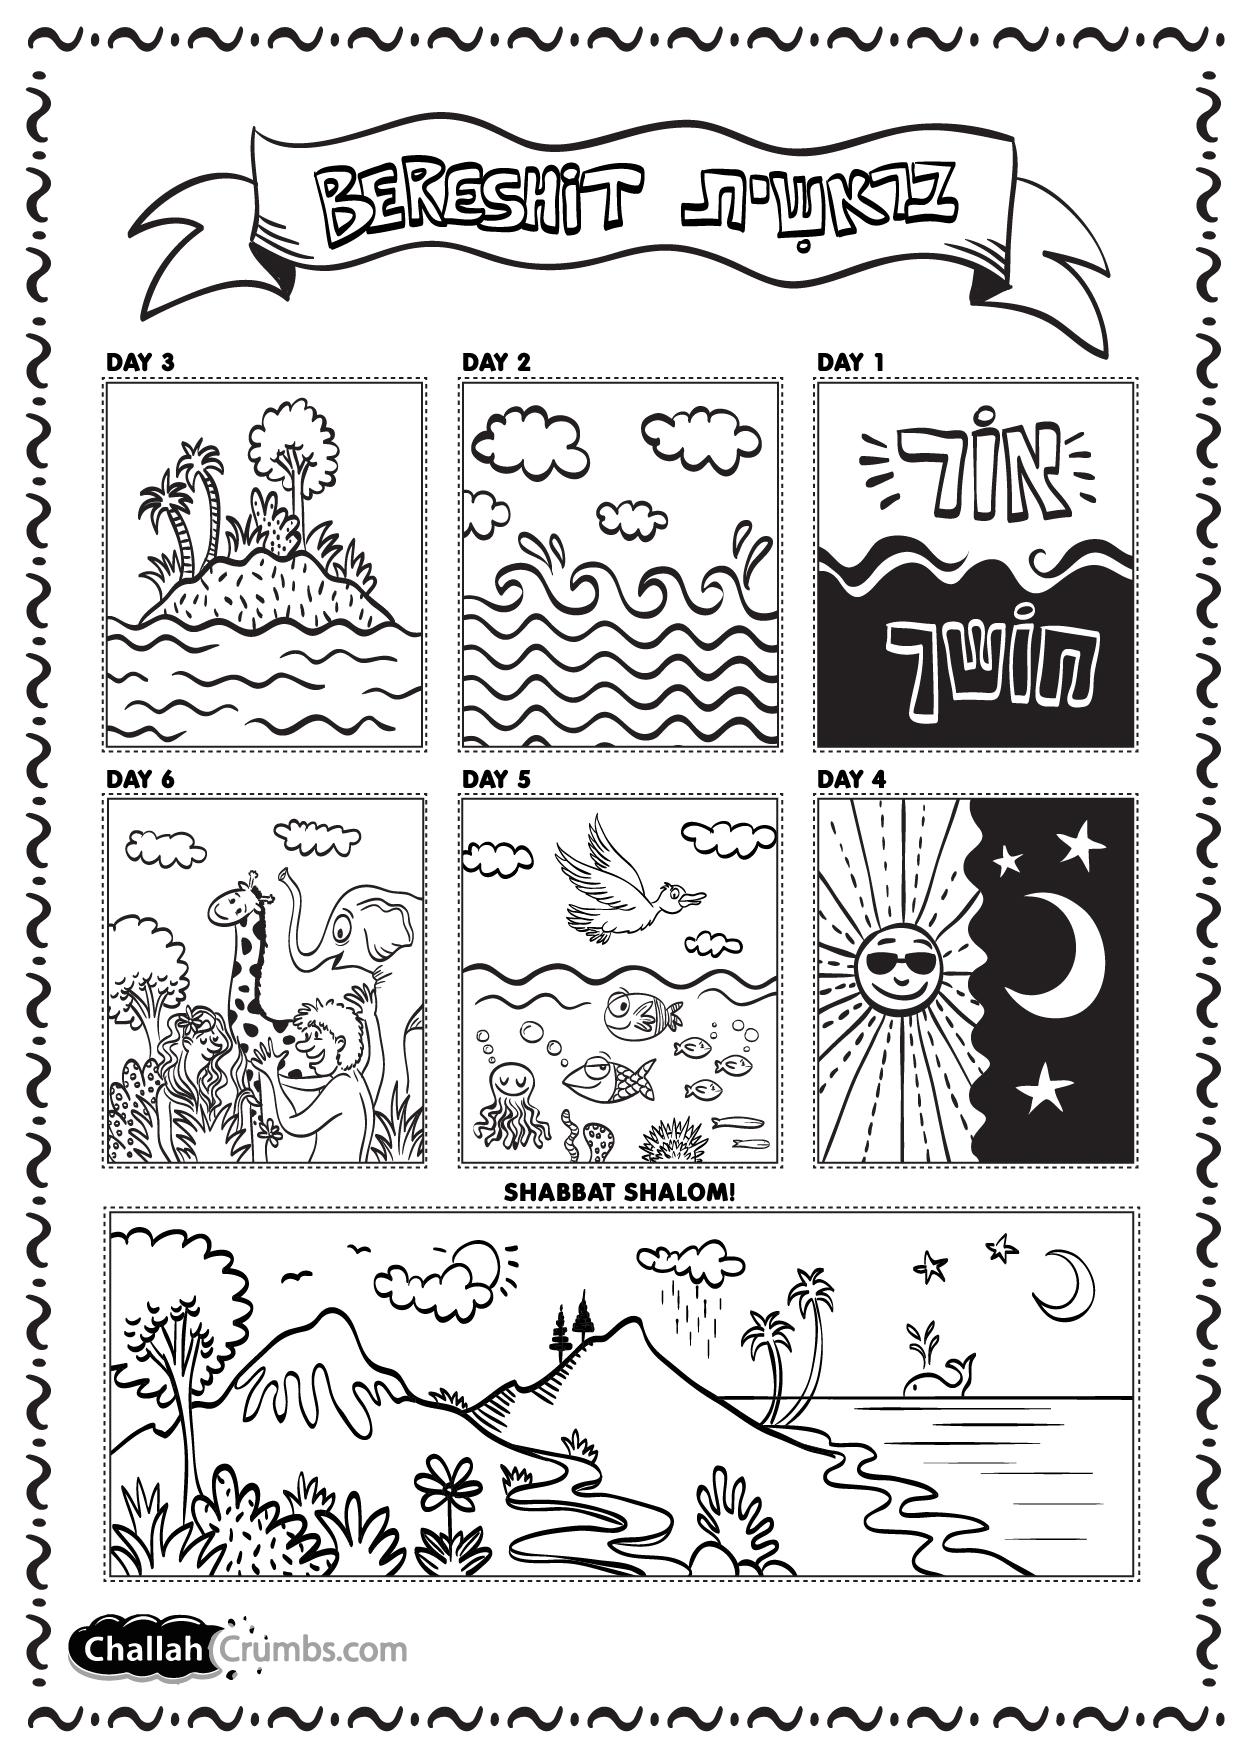 10 plagues coloring pages for preschool